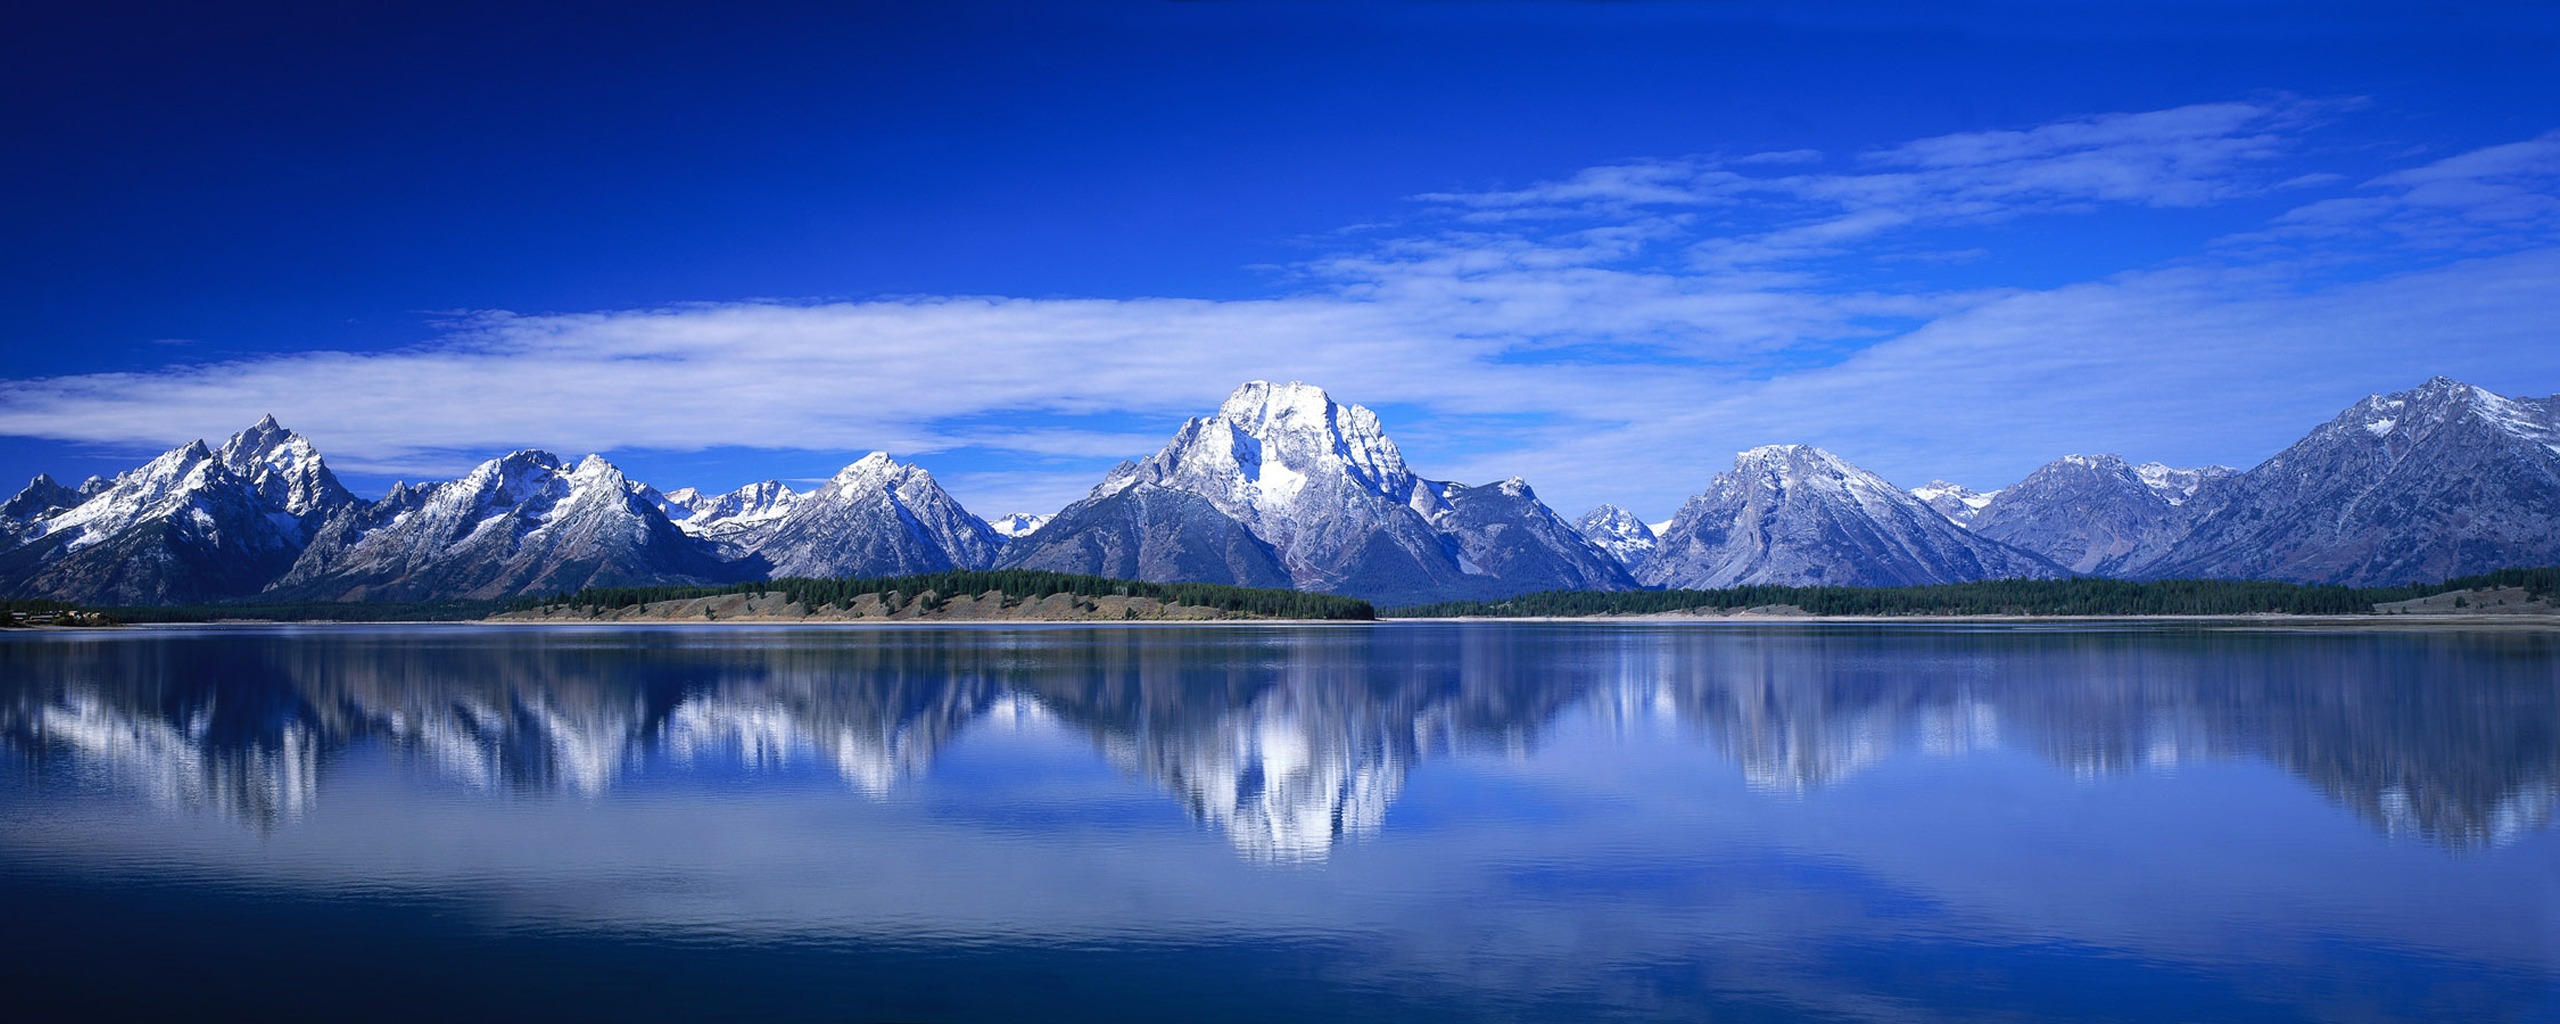 Mountain Widescreen HD Wallpapers Attachment 12516 - HD Wallpapers ...